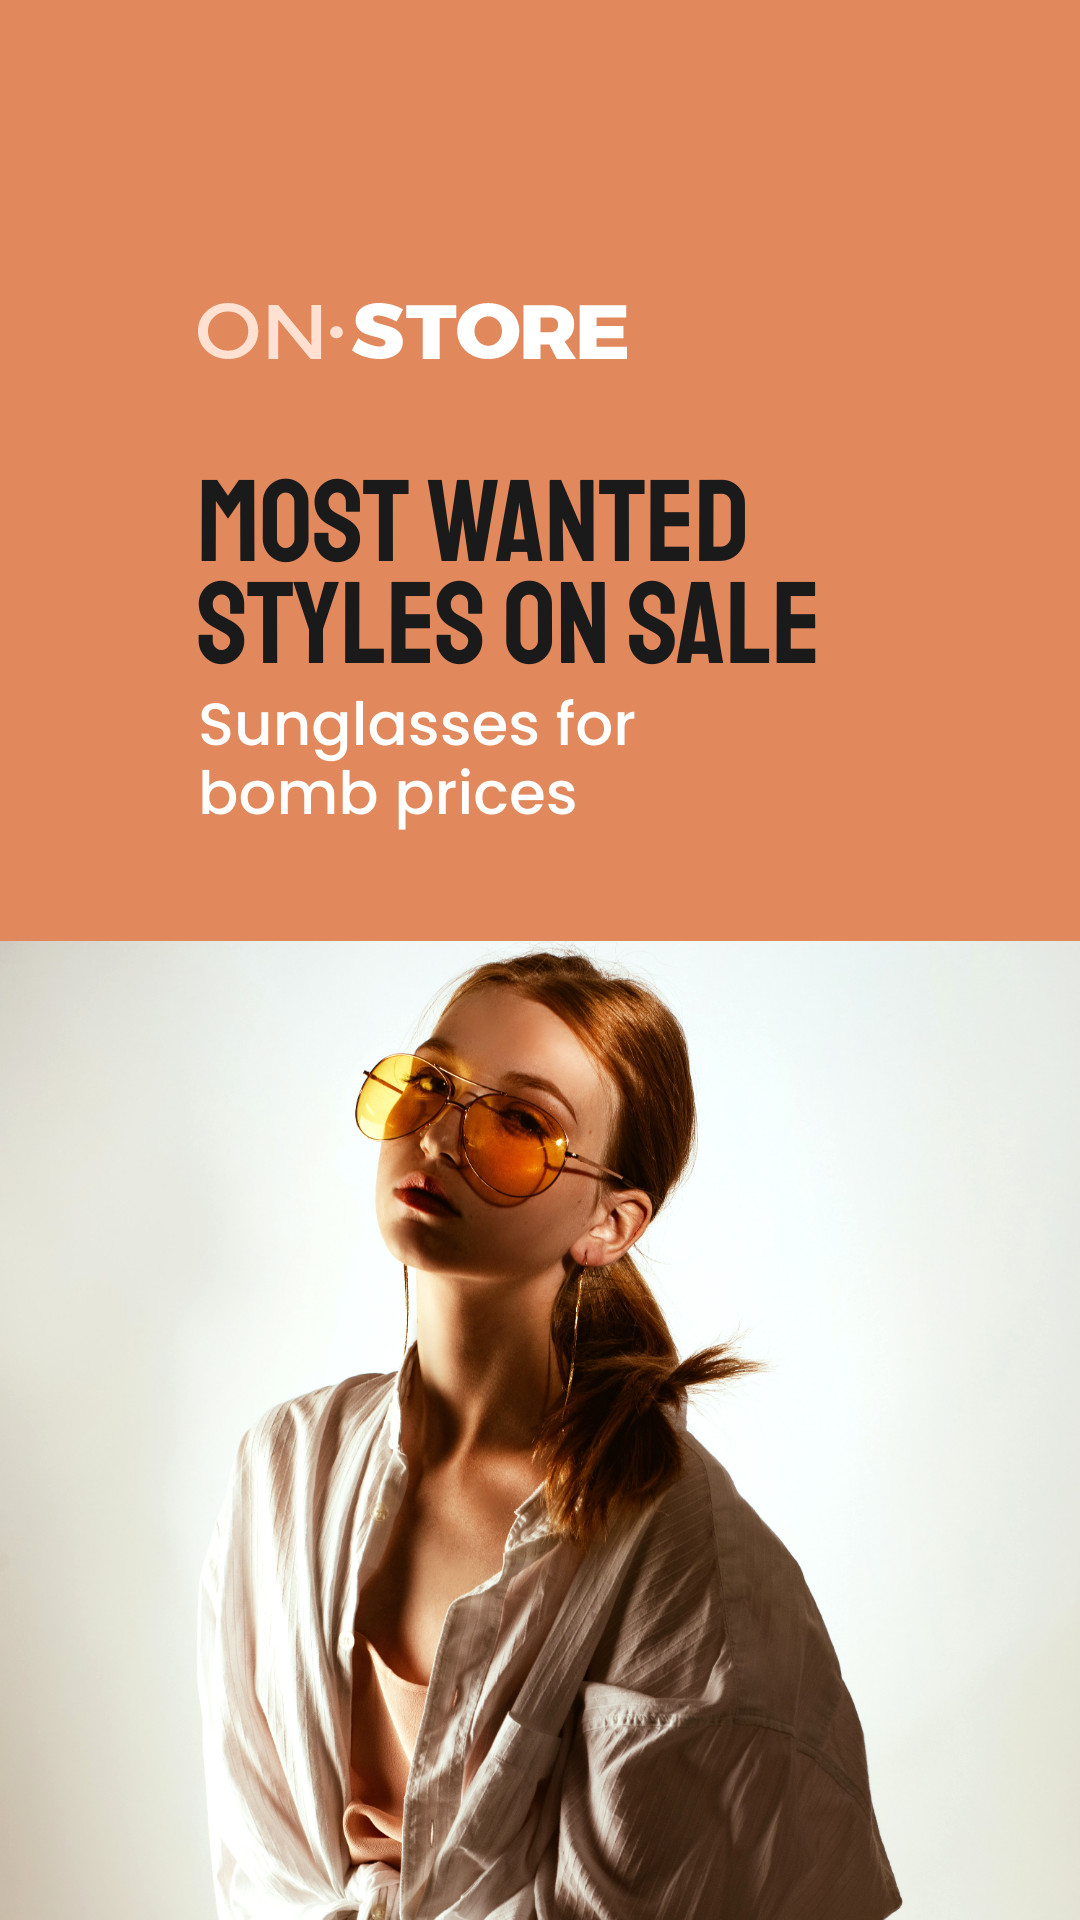 Most Wanted Sunglass Styles on Sale Inline Rectangle 300x250